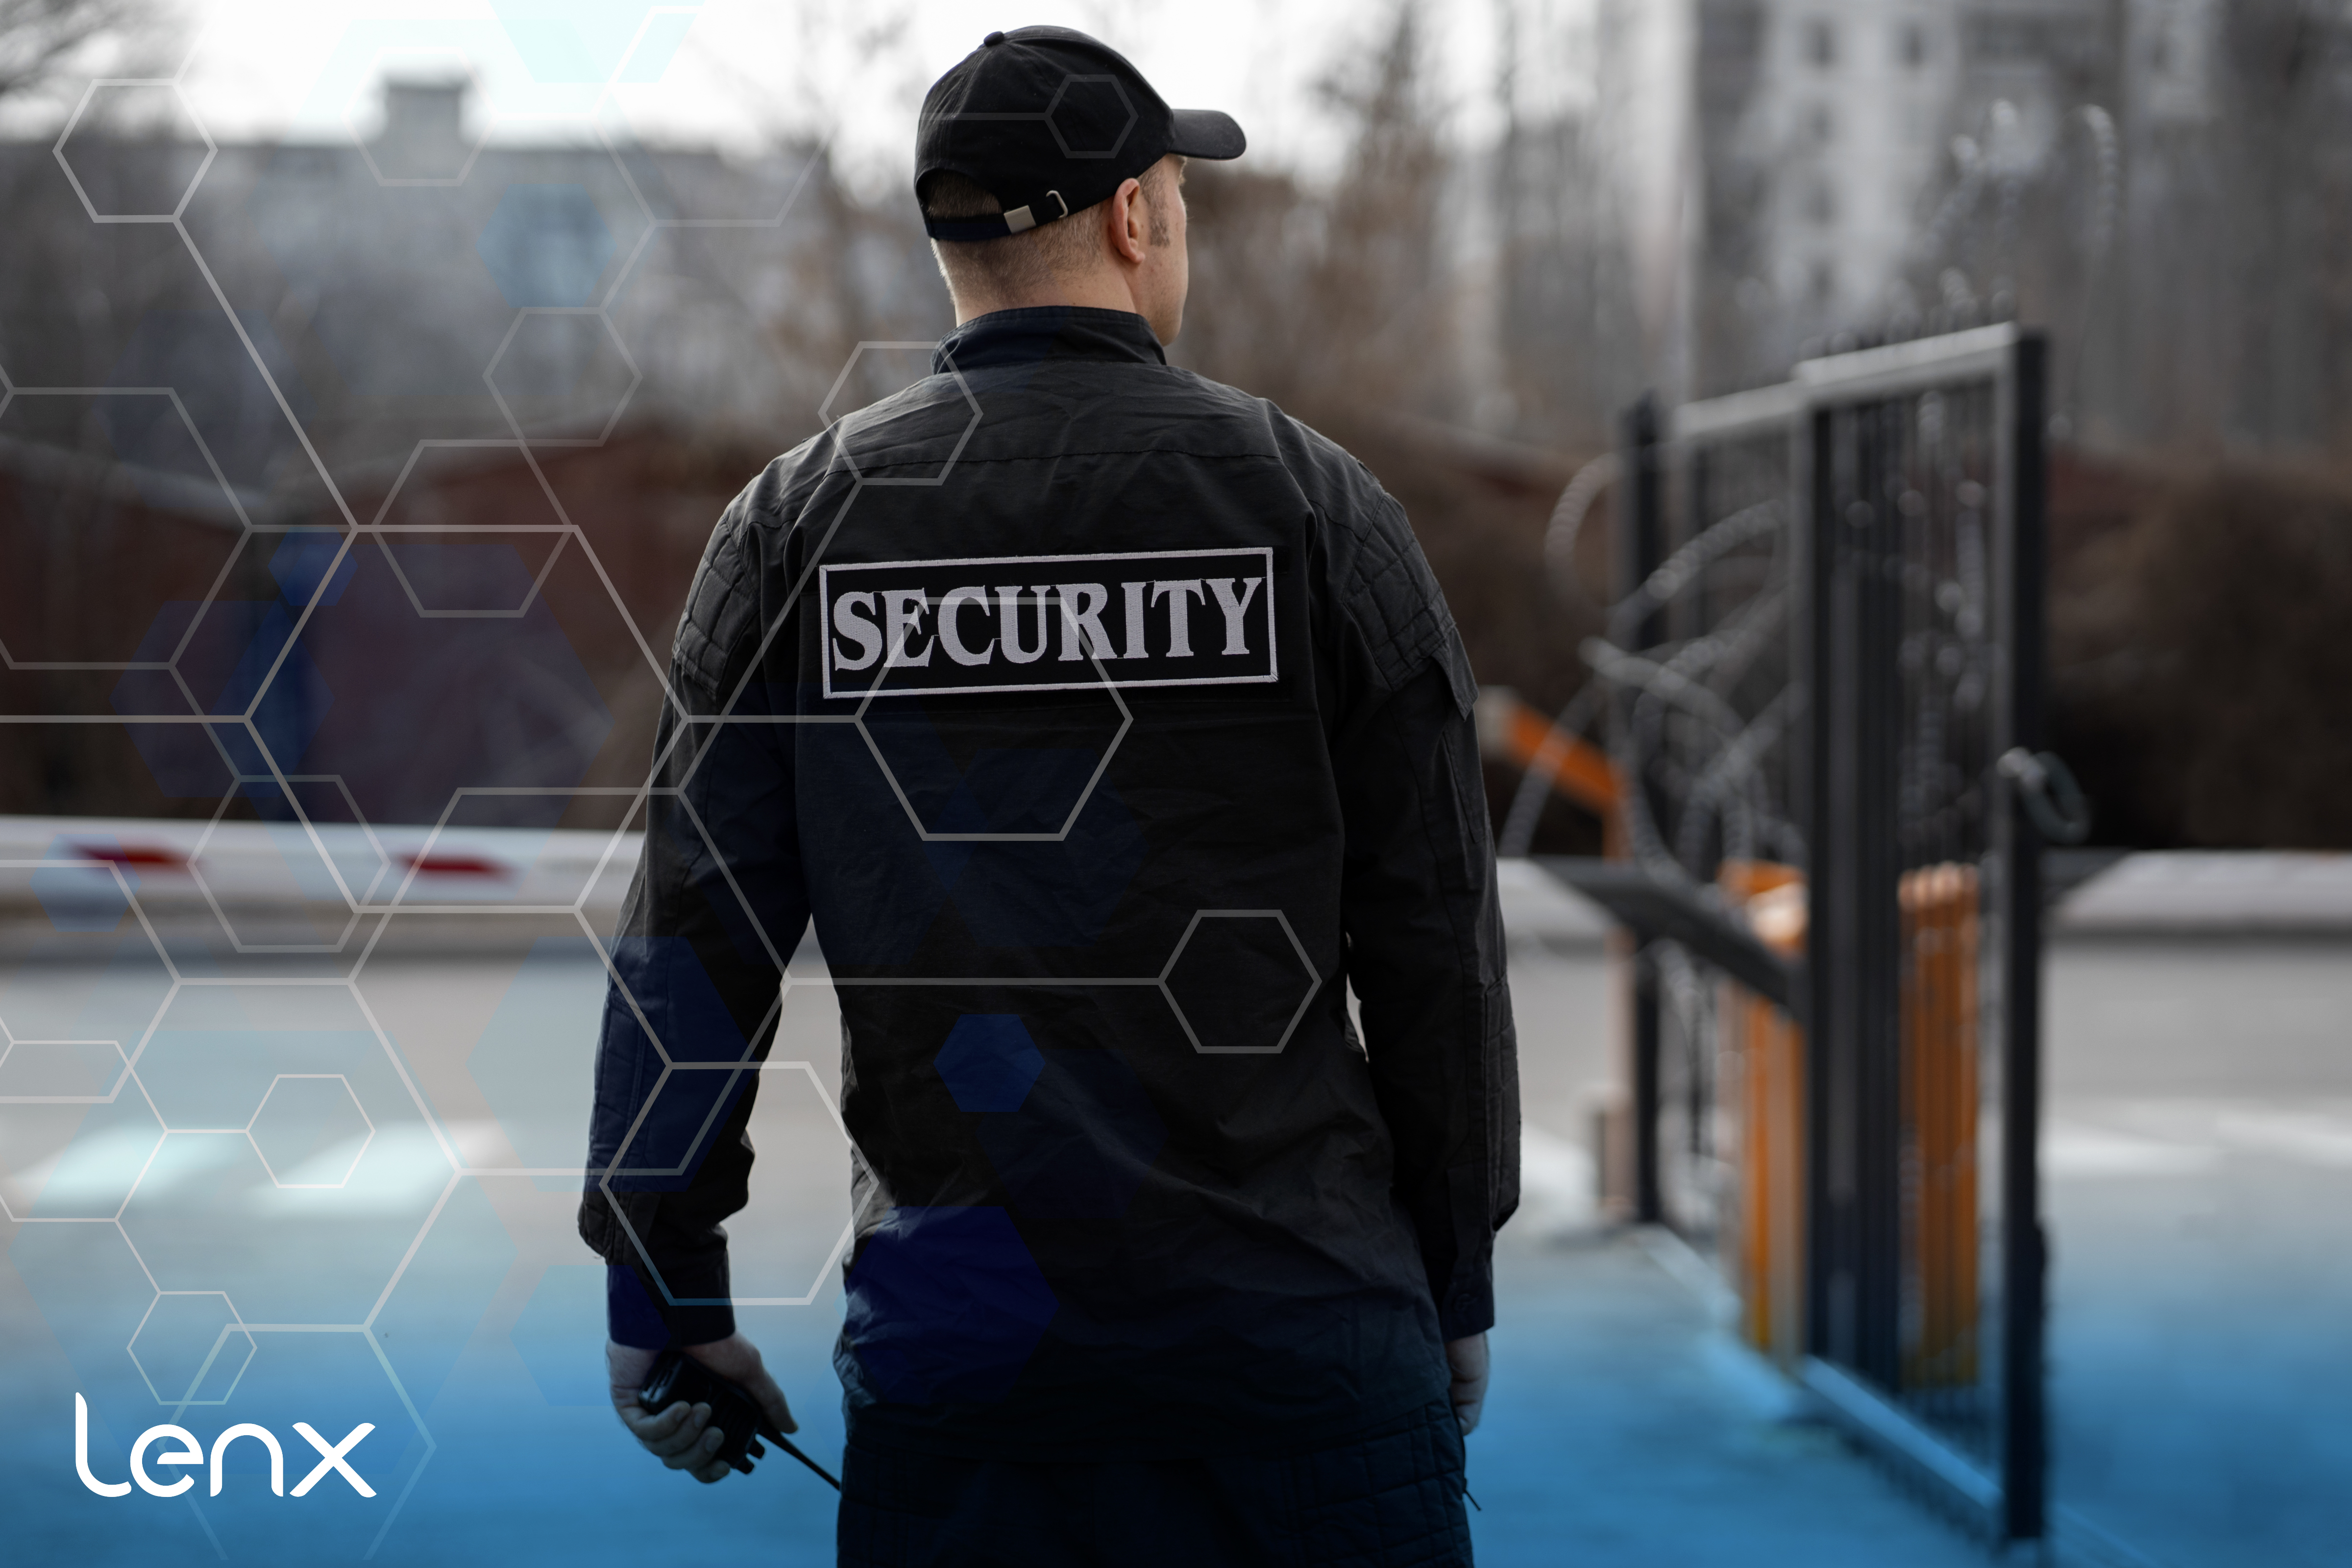 Advantages of AI Security and Active Shooter Detection Over Traditional Security pt-2